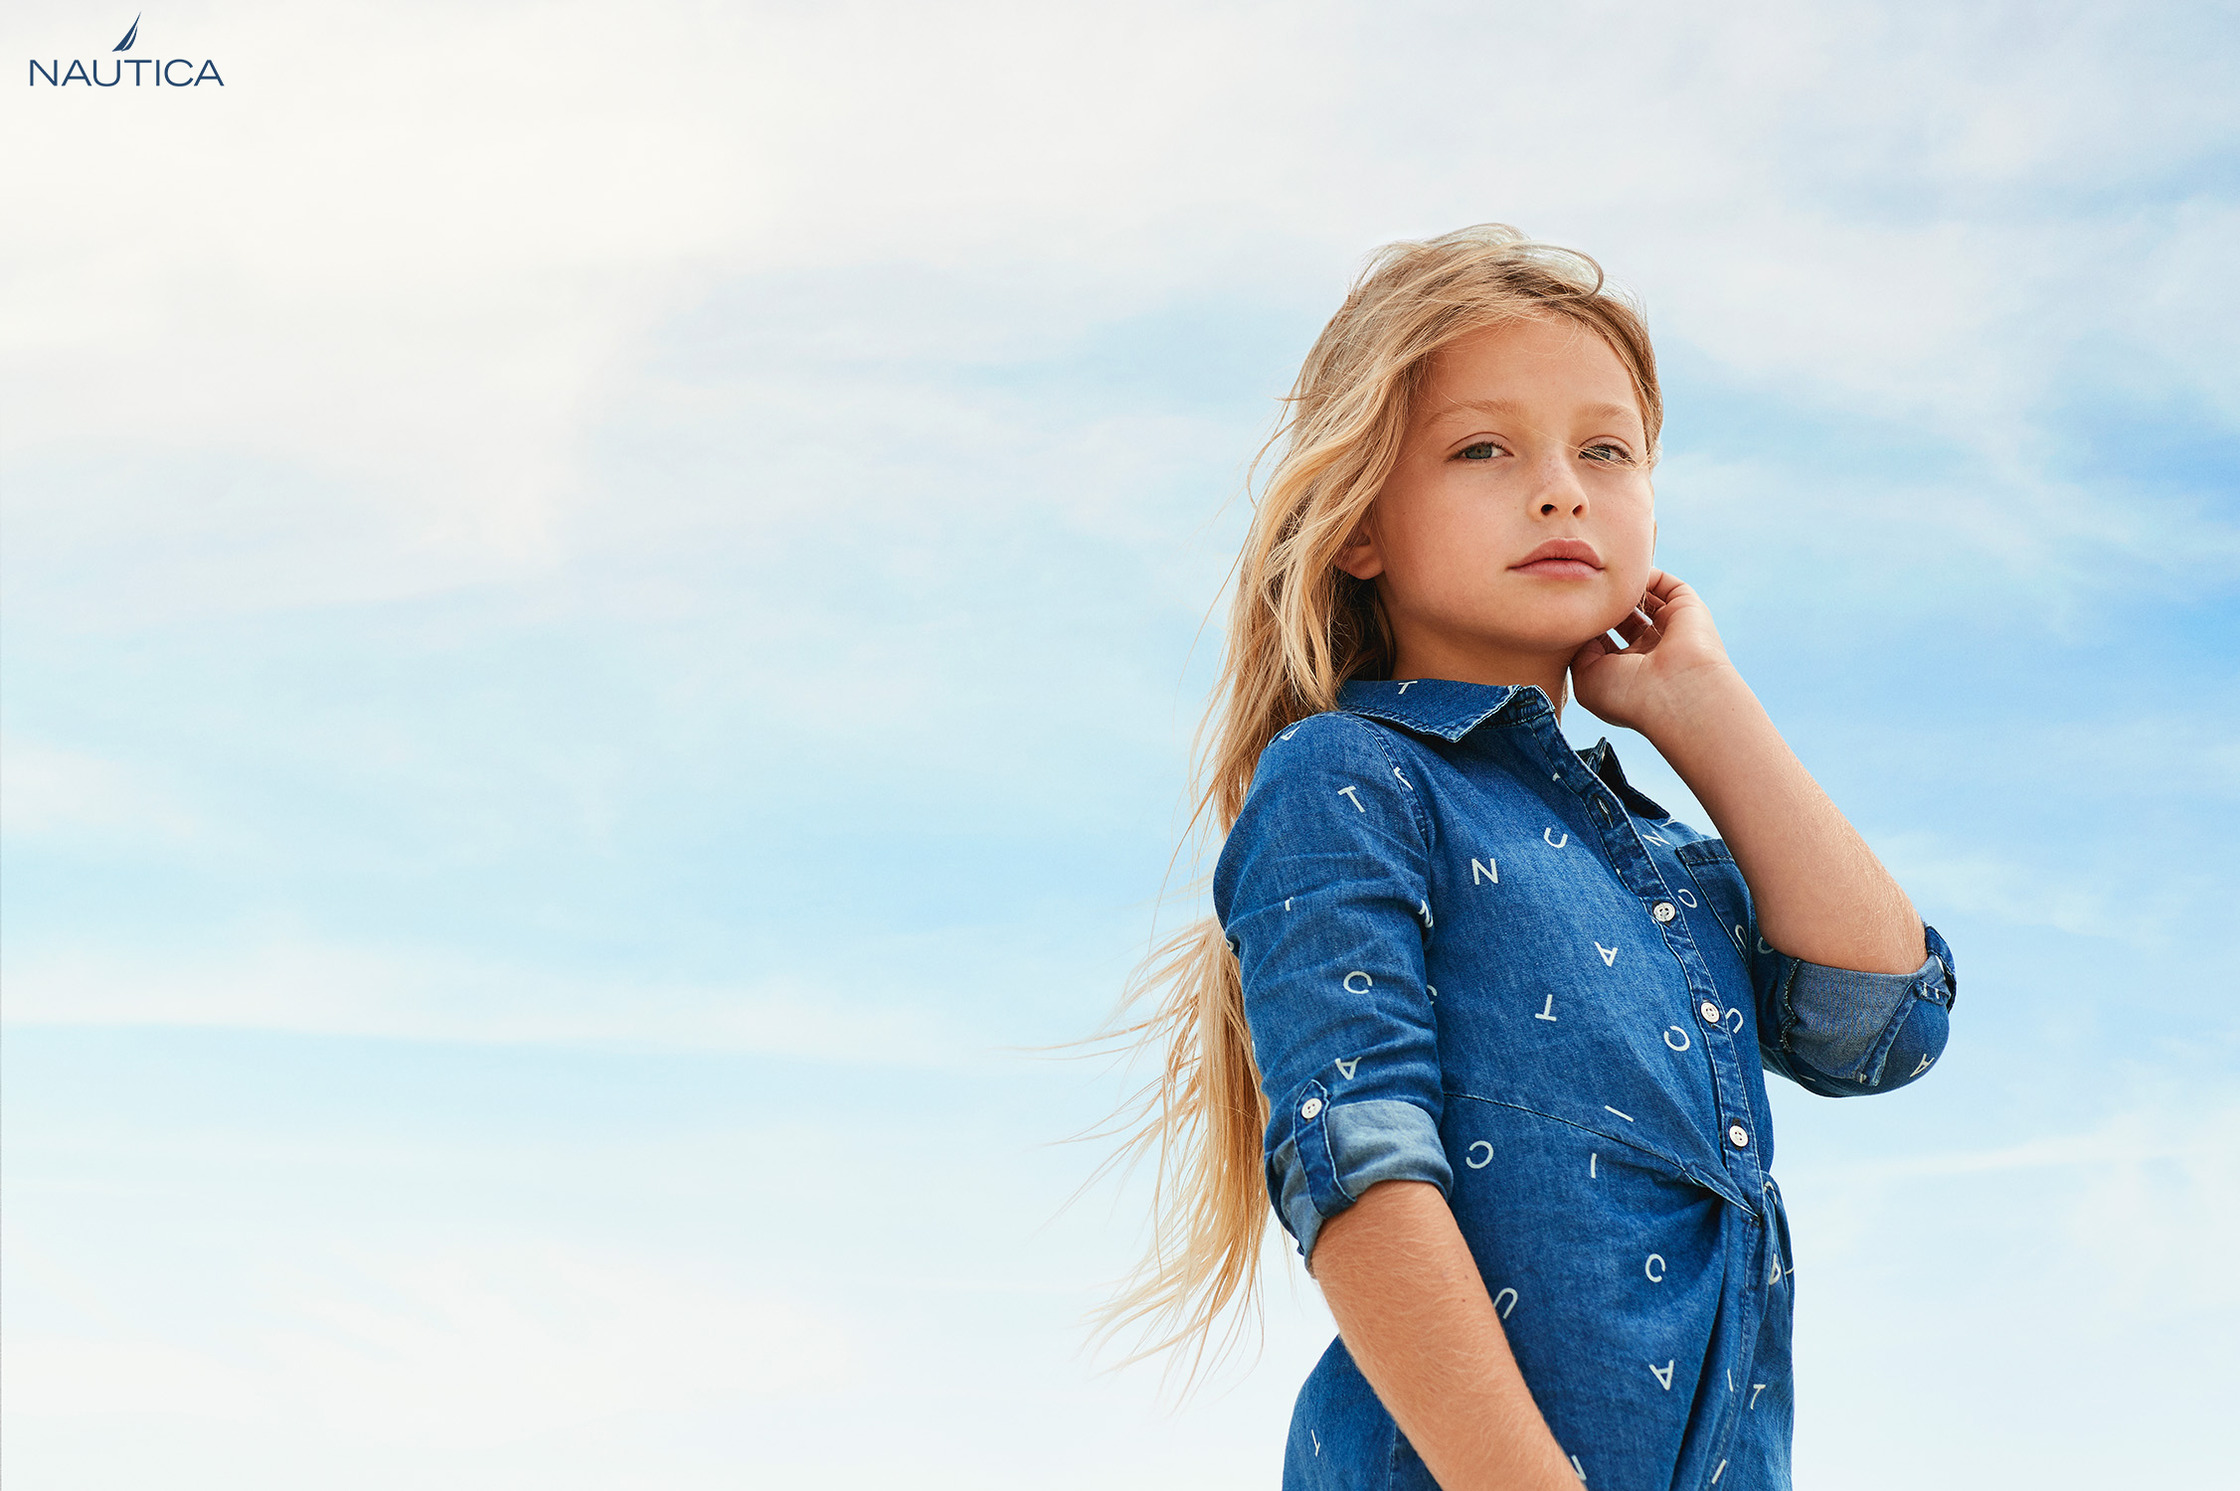 a young girl in a denim dress posing for a photo